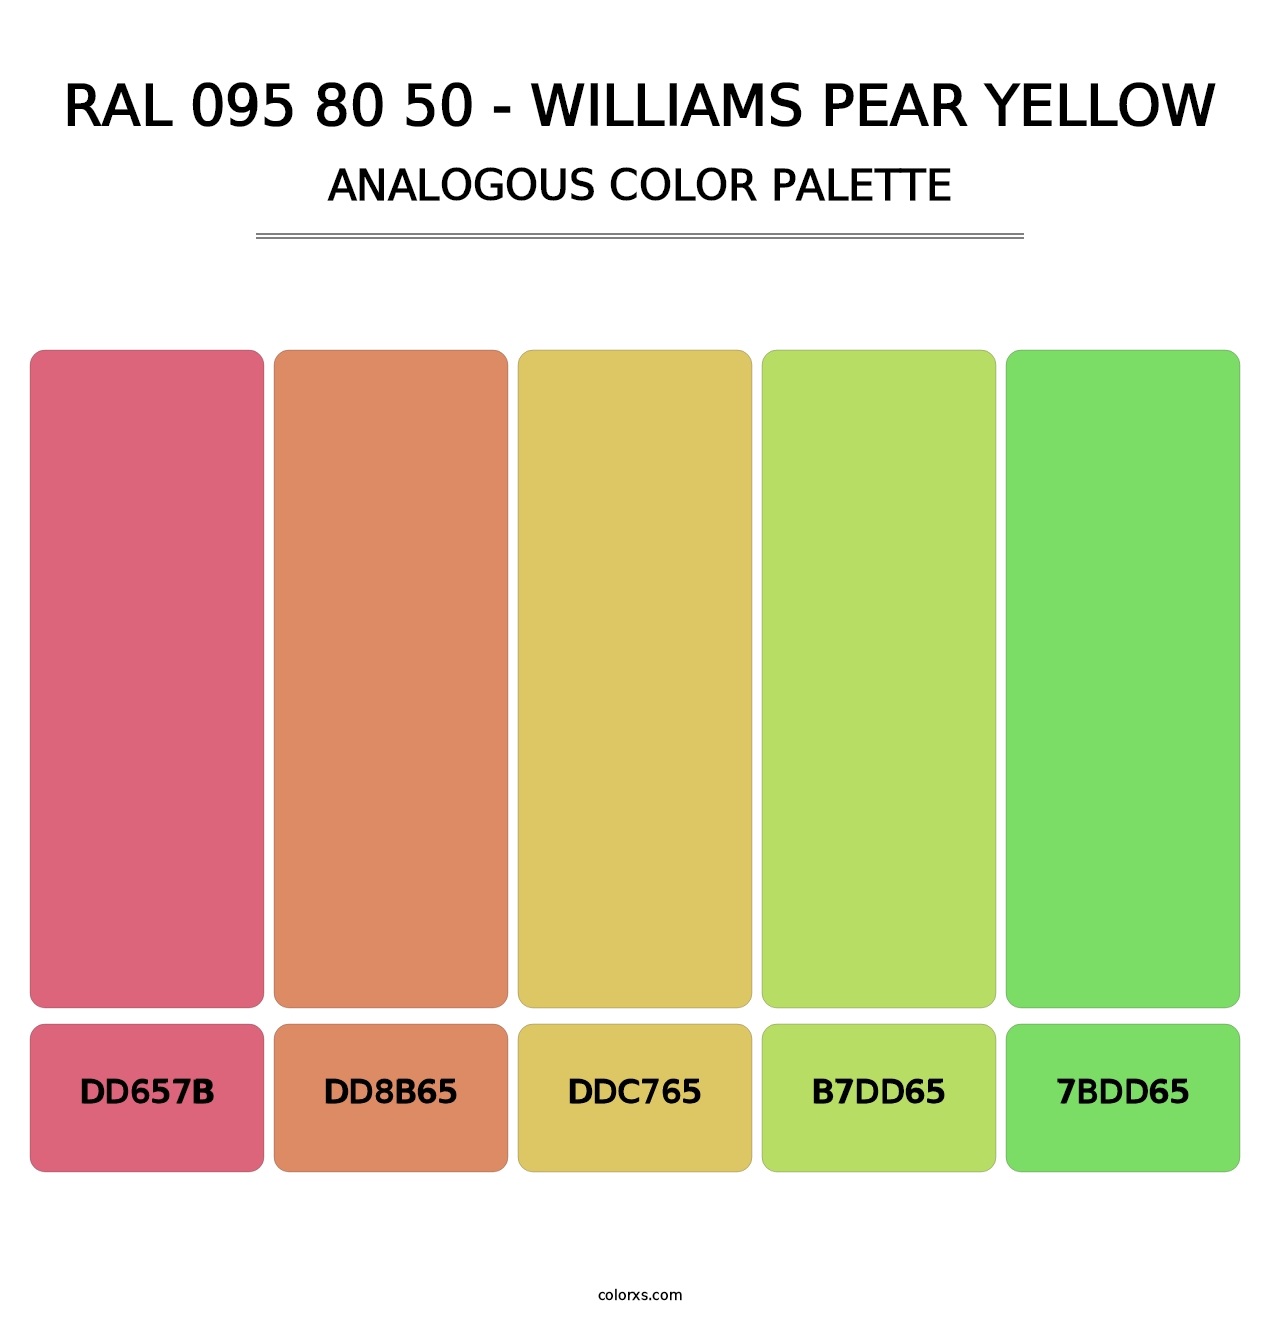 RAL 095 80 50 - Williams Pear Yellow - Analogous Color Palette